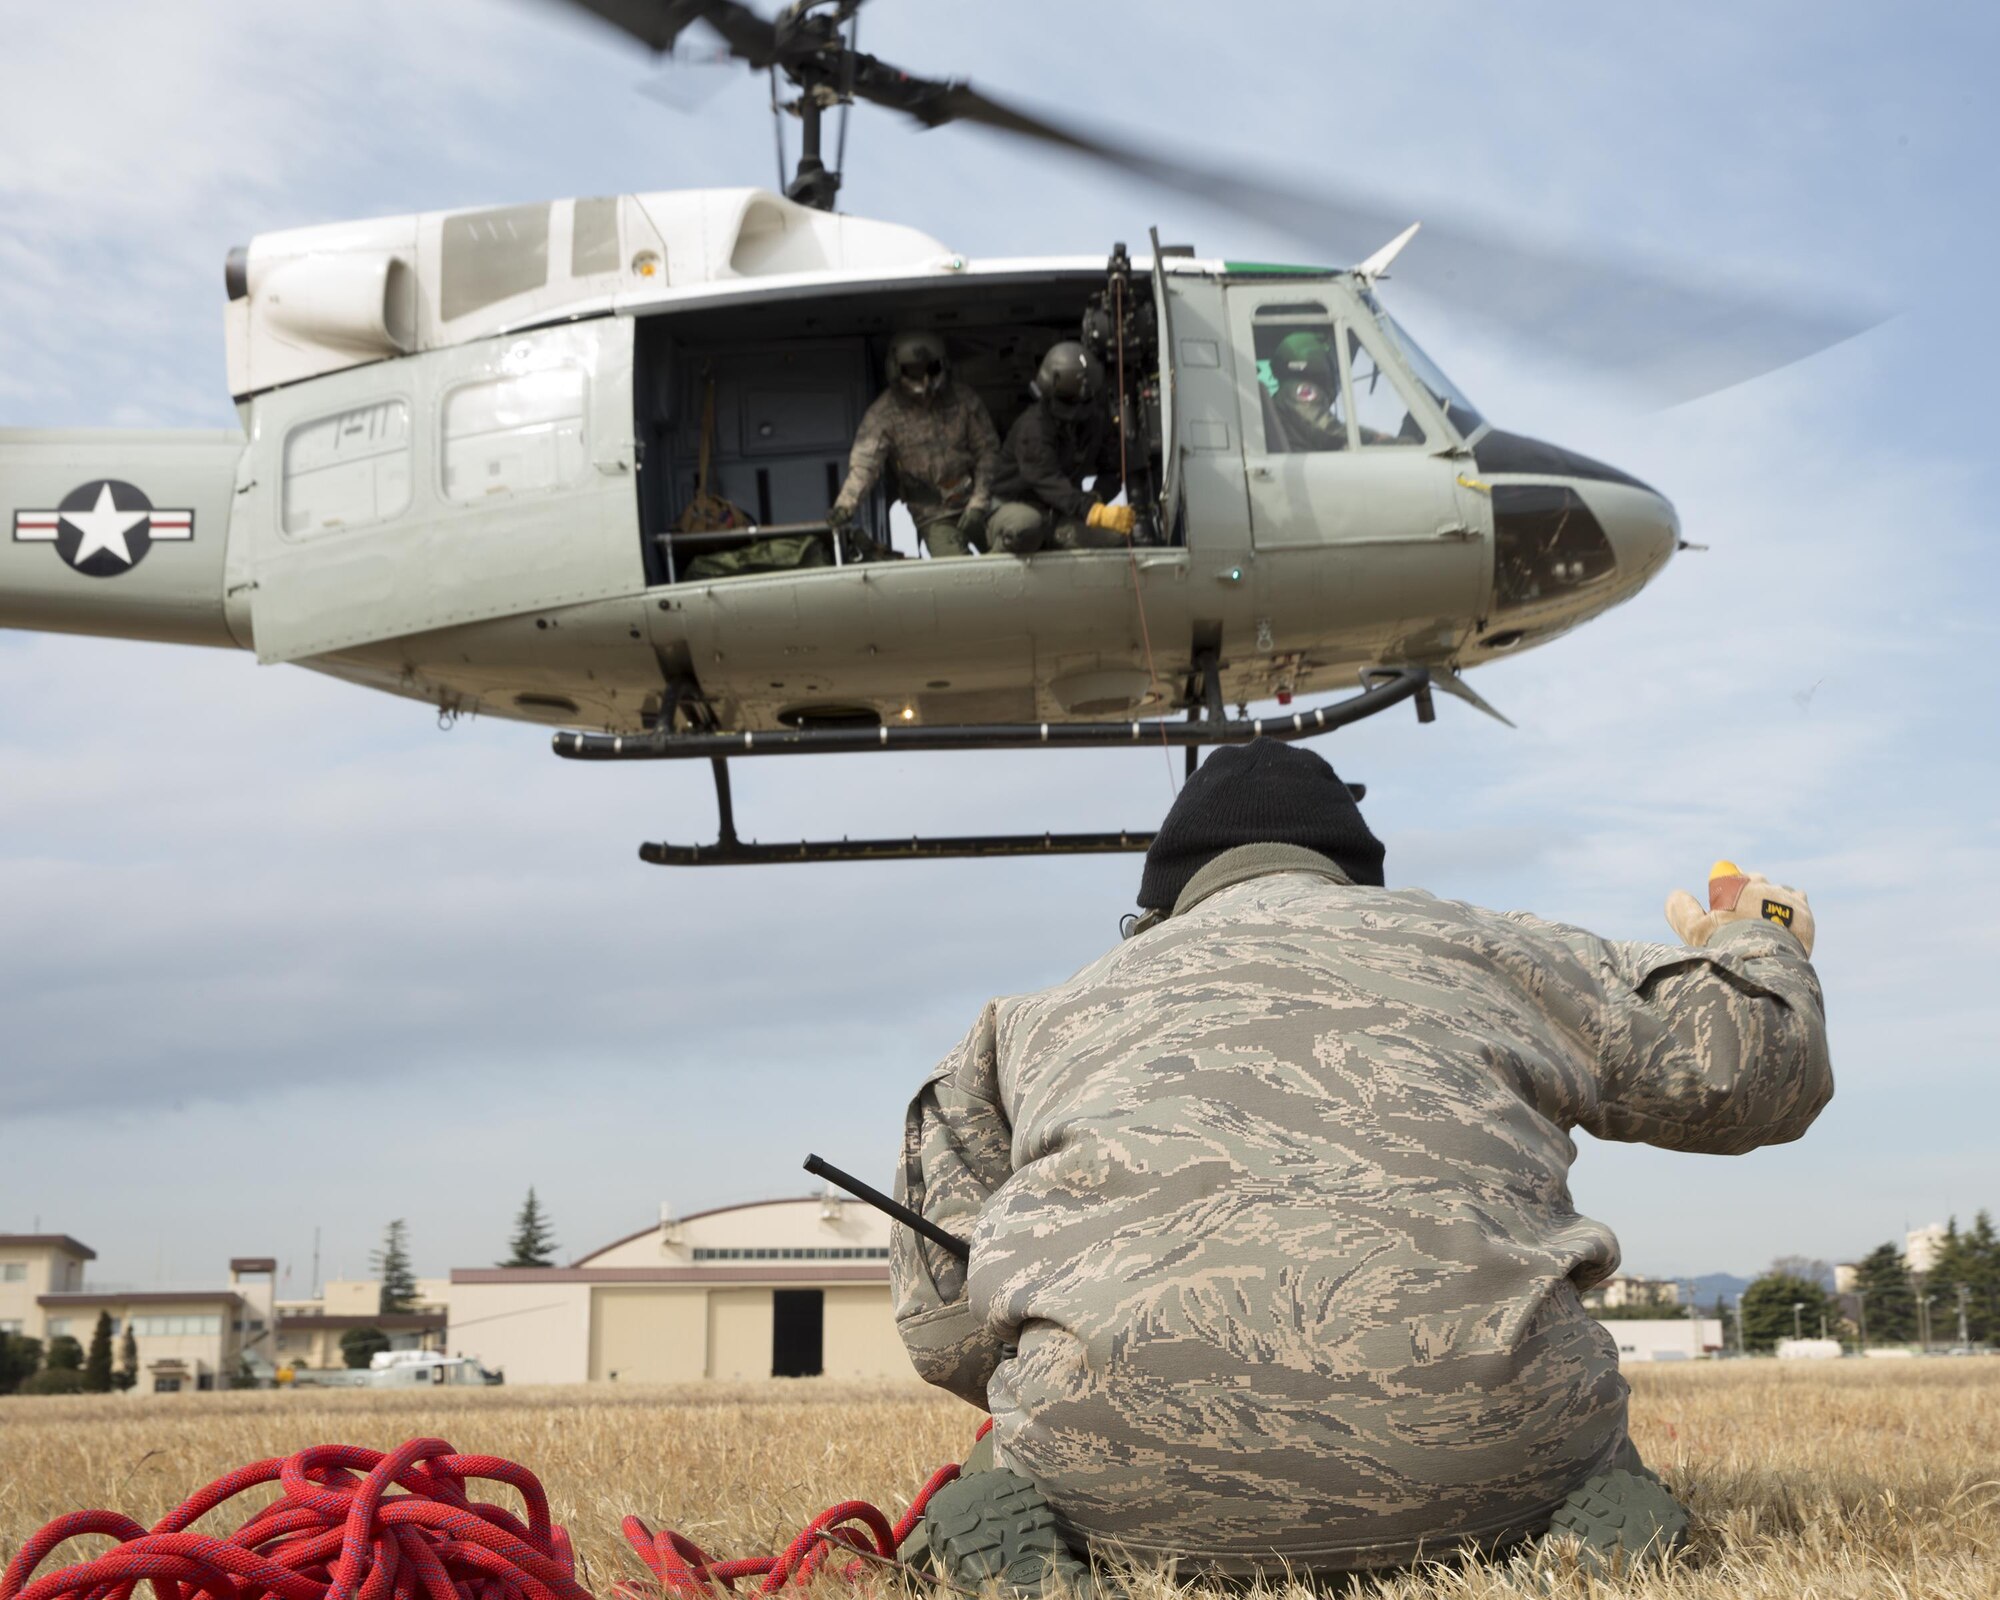 Tech. Sgt. Christopher Rector, 459th Airlift Squadron flight engineer, supervises a UH-1 Huey lifting a testing weight, during hoist training at Yokota Air Base, Japan, Feb. 22, 2016. The 459th AS recently improved their search and rescue capabilities by outfitting two Hueys with new rescue hoists. (U.S. Air Force photo by Osakabe Yasuo/Released)